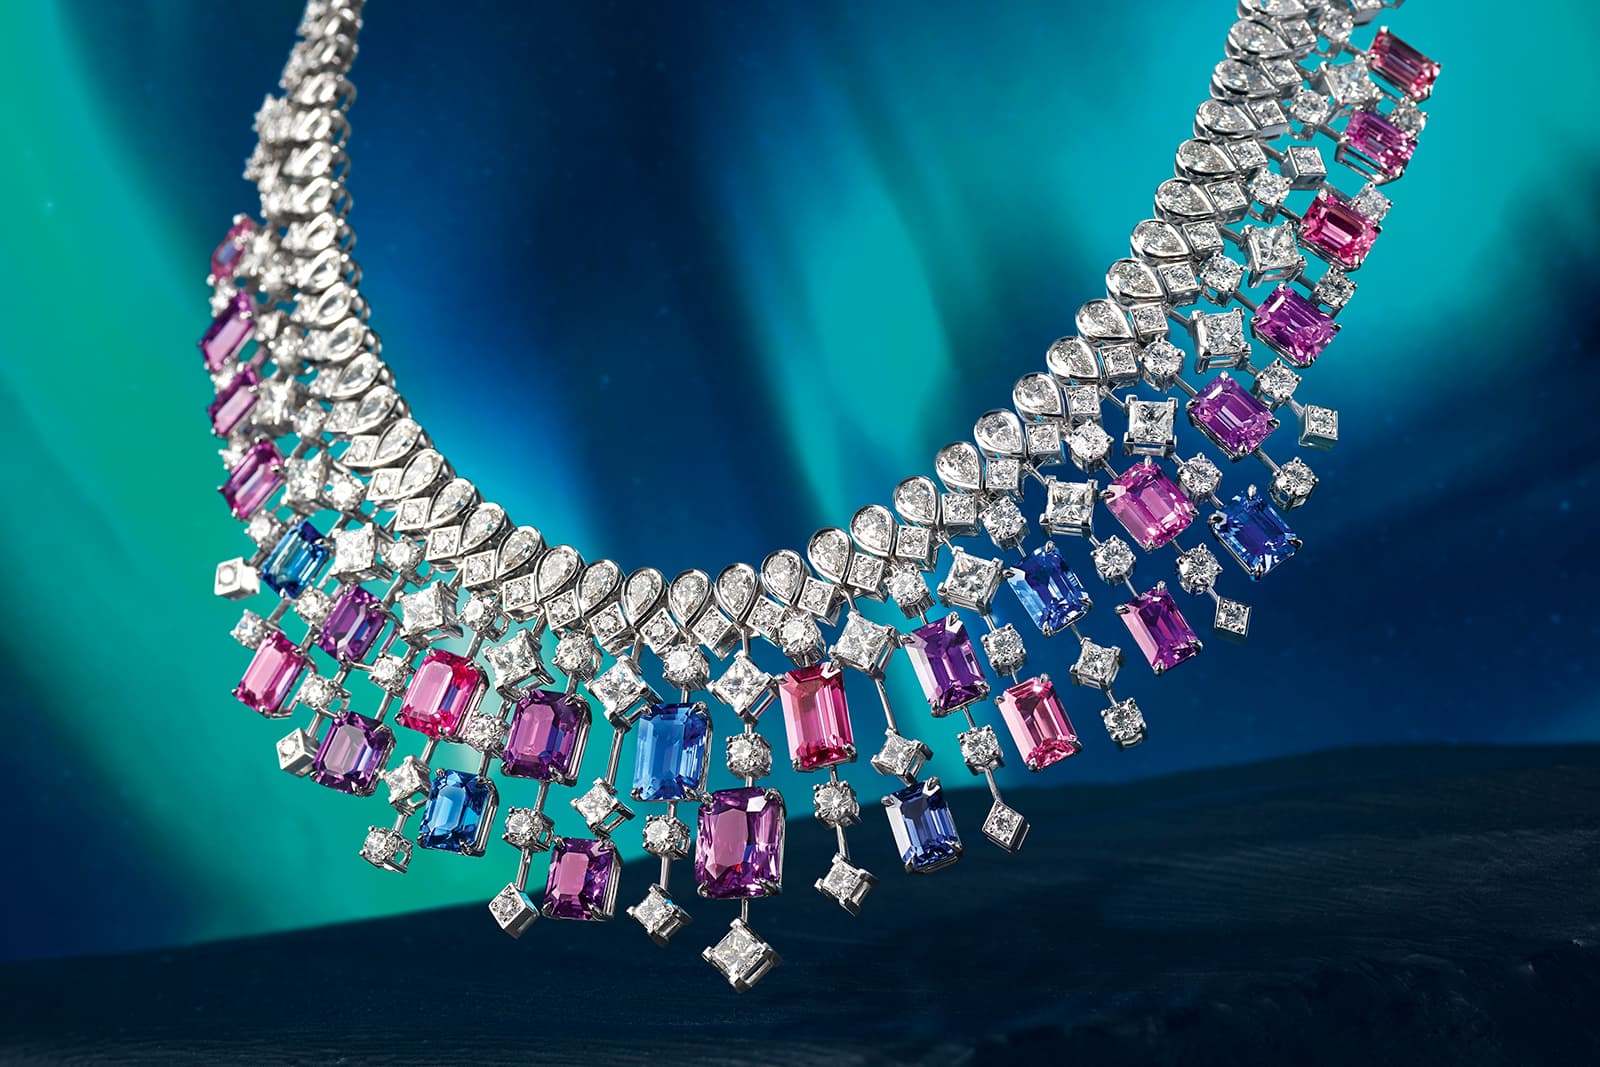 Piaget Gloaming Illuminations necklace with 27 pink, purple and blue sapphires and diamonds from the Extraordinary Lights High Jewellery Collection